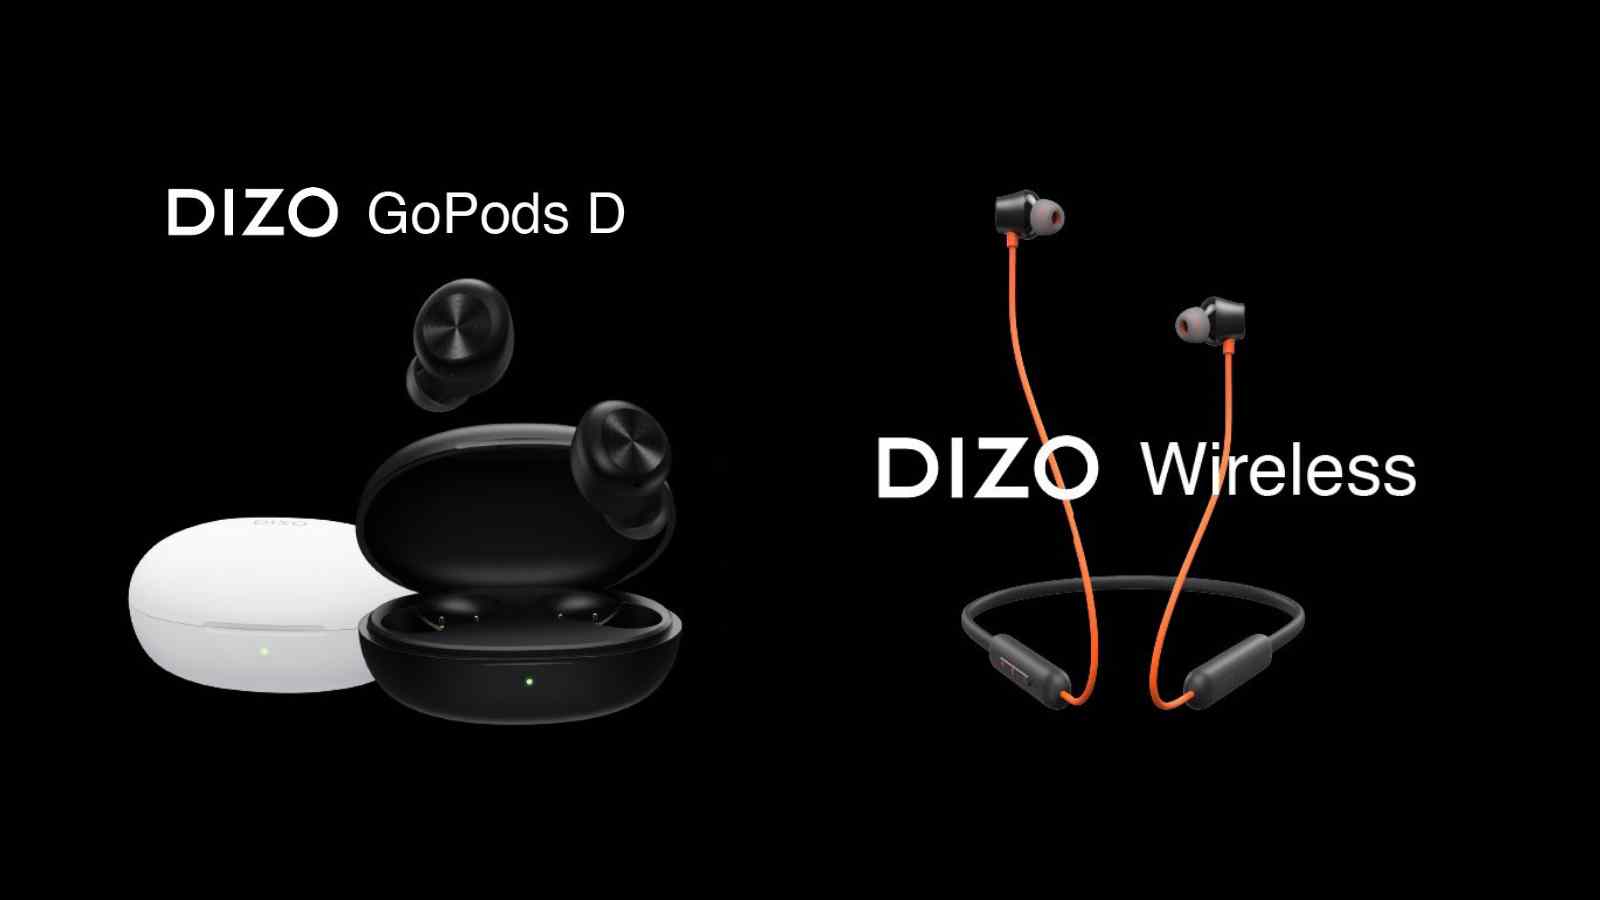 Realme Dizo Go Pods D and Dizo Wireless Neckband launched in India: Price, Specifications